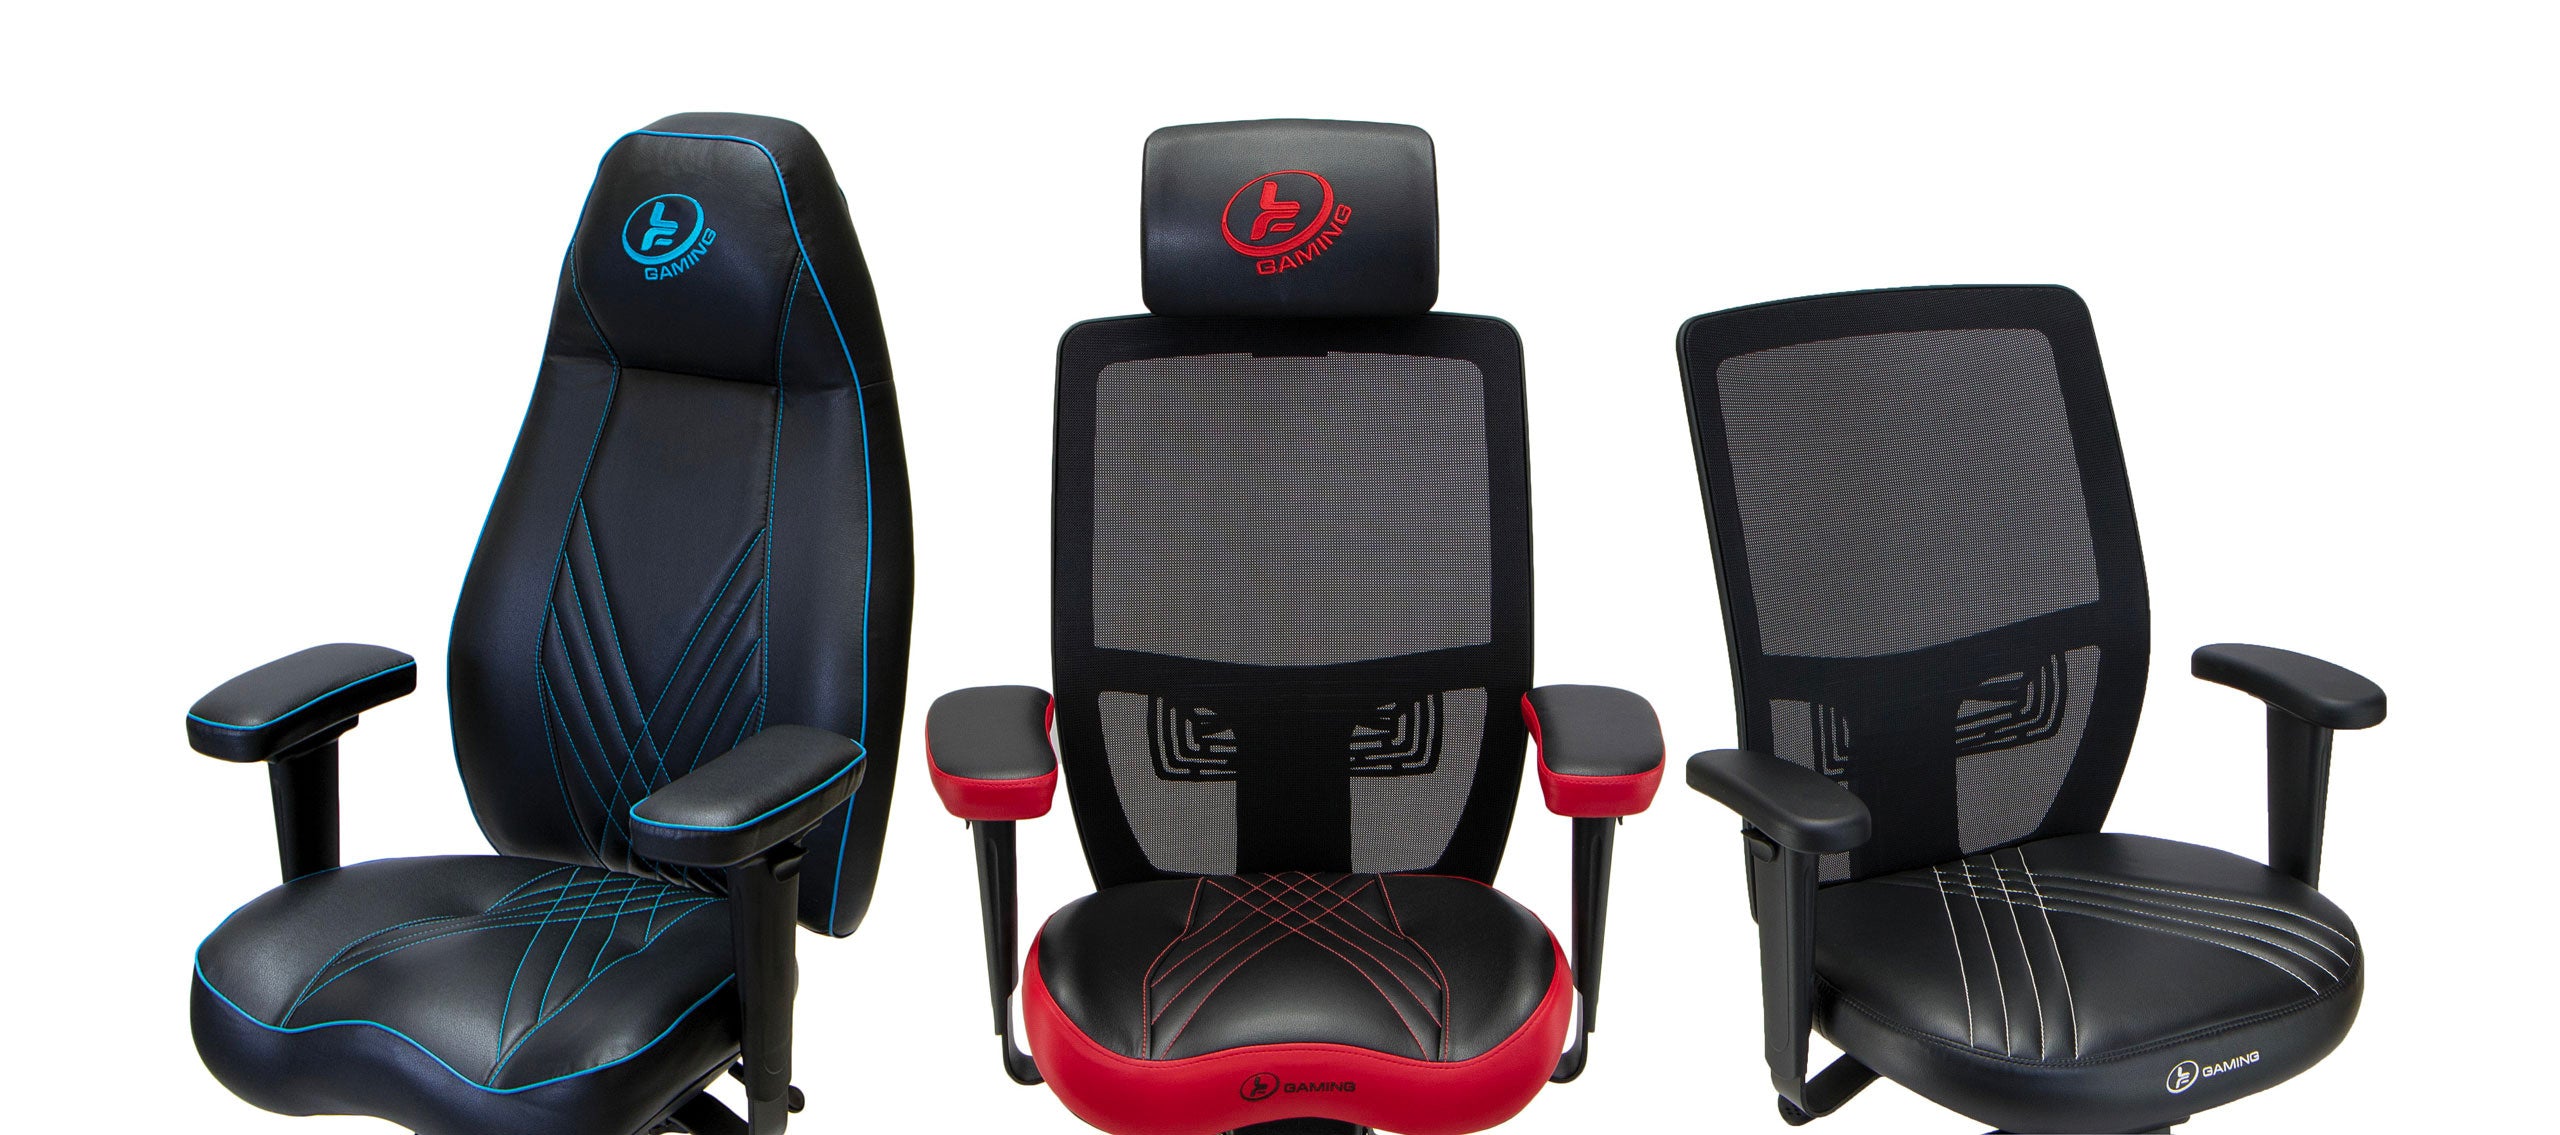 Lf A Chair With Comfort And Style Lf Gaming Chairs At E3